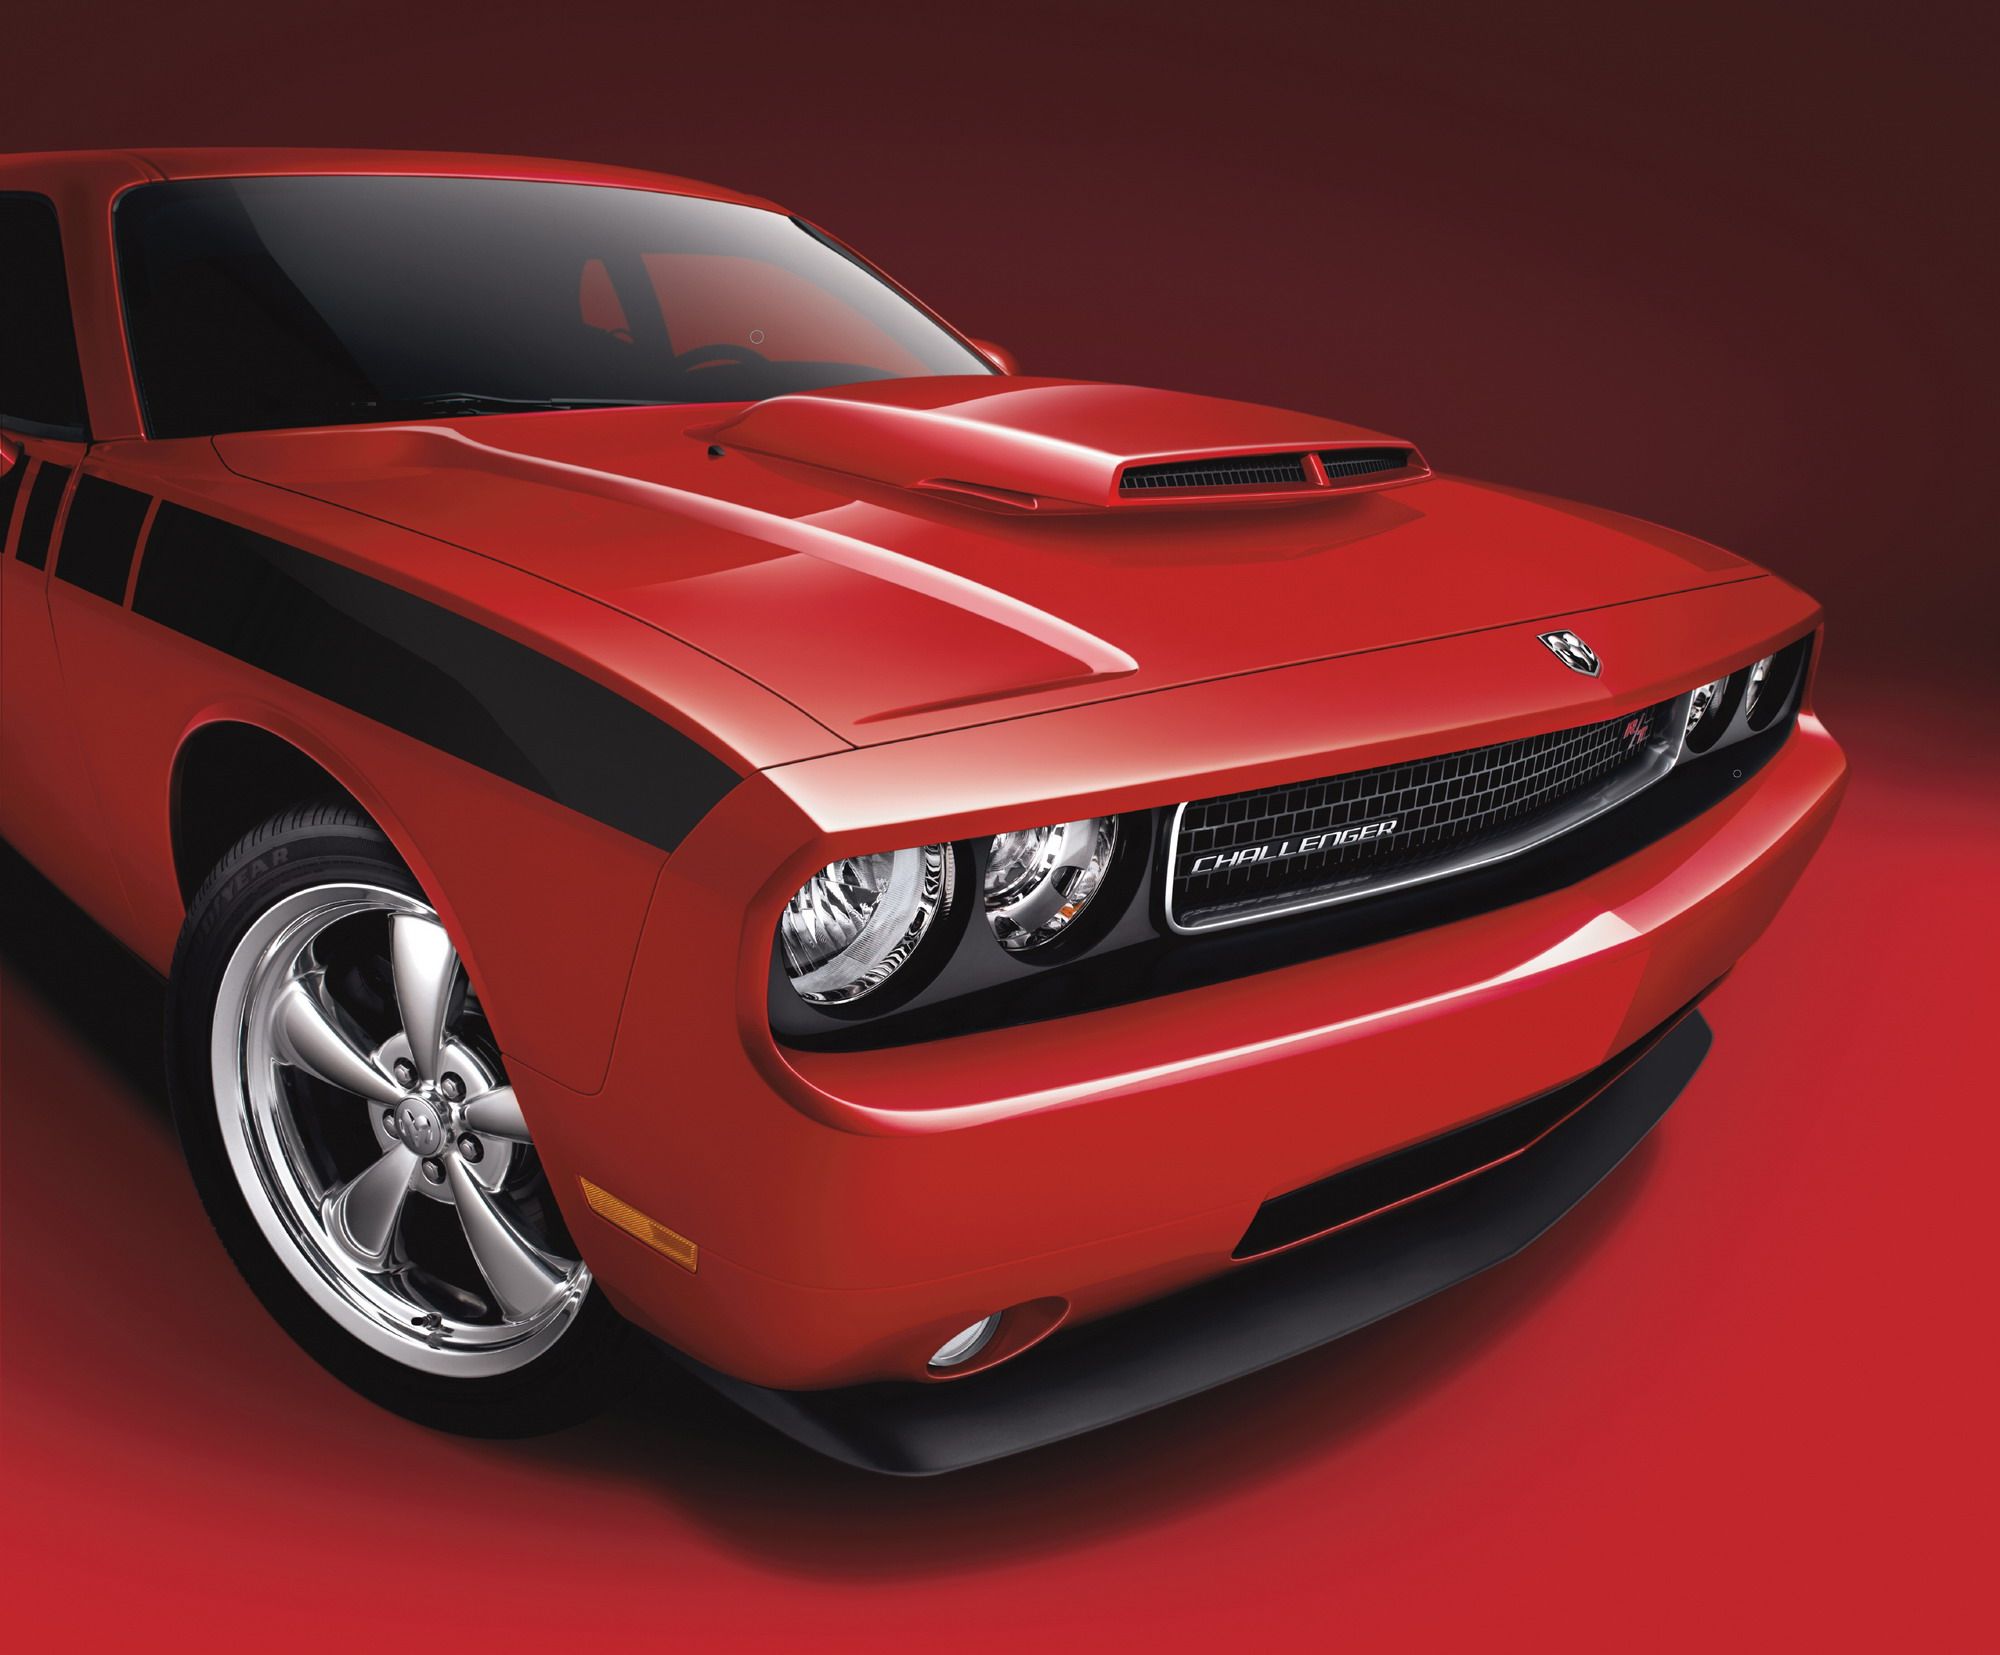 2010 Dodge Challenger with Performance Appearance Package